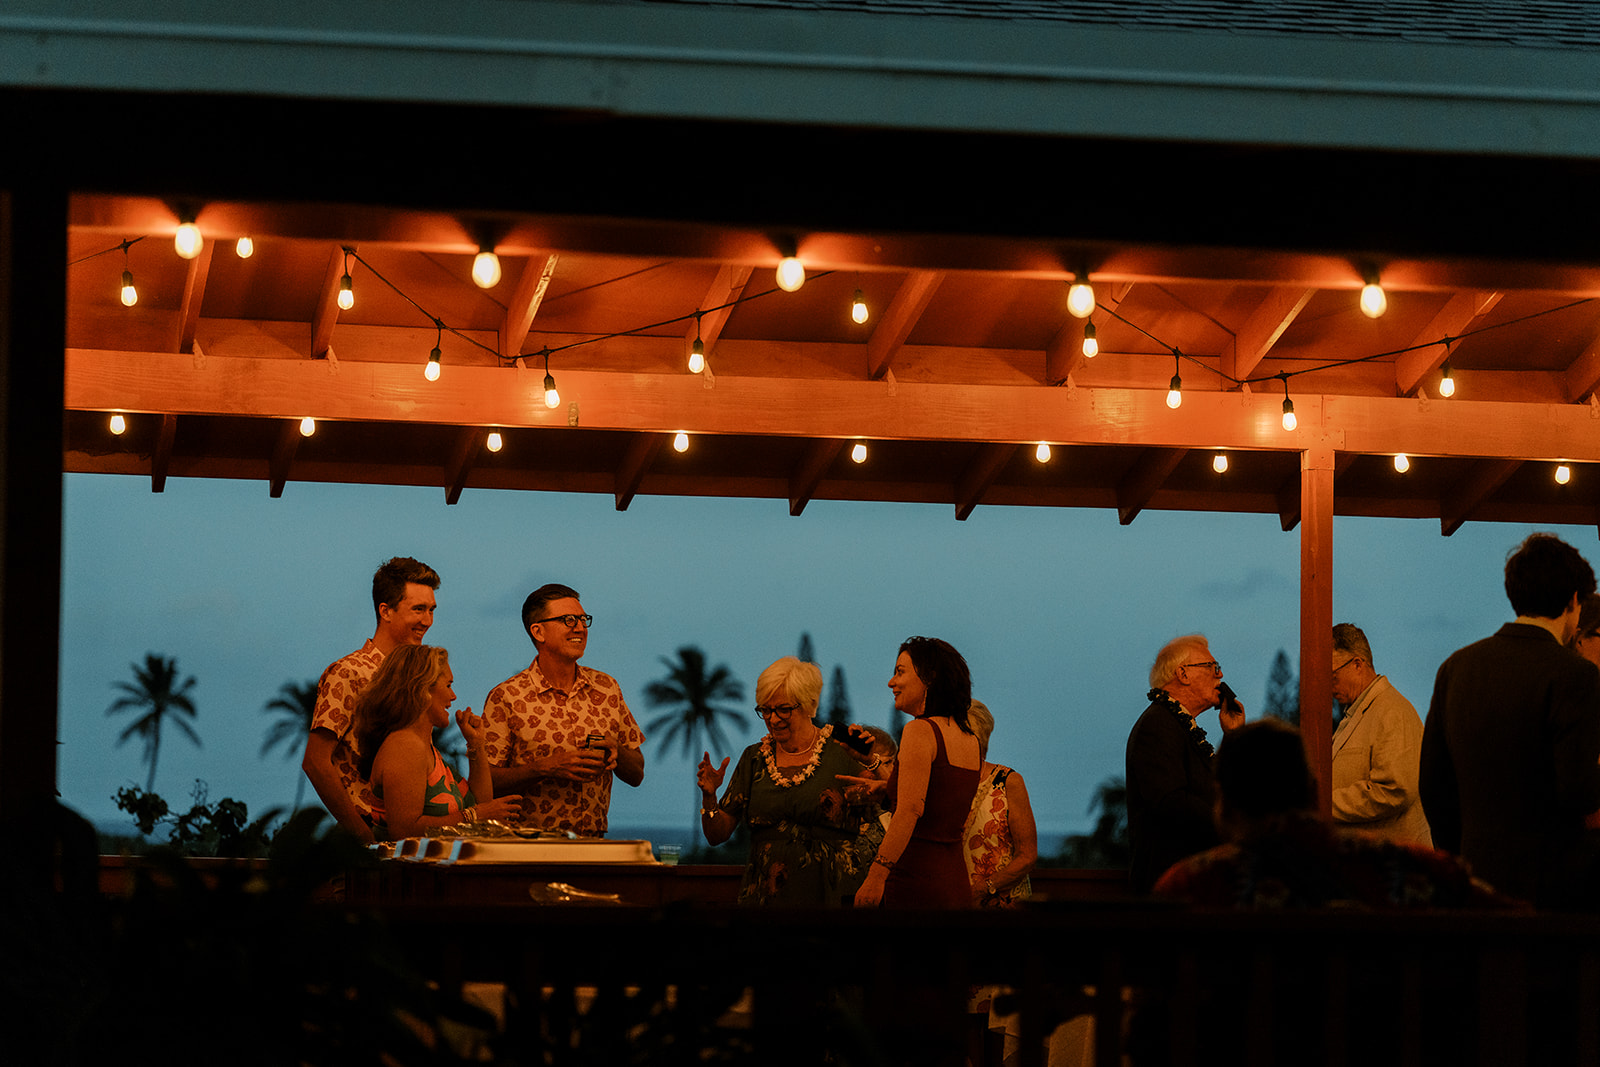 A group of people standing around a patio at dusk.